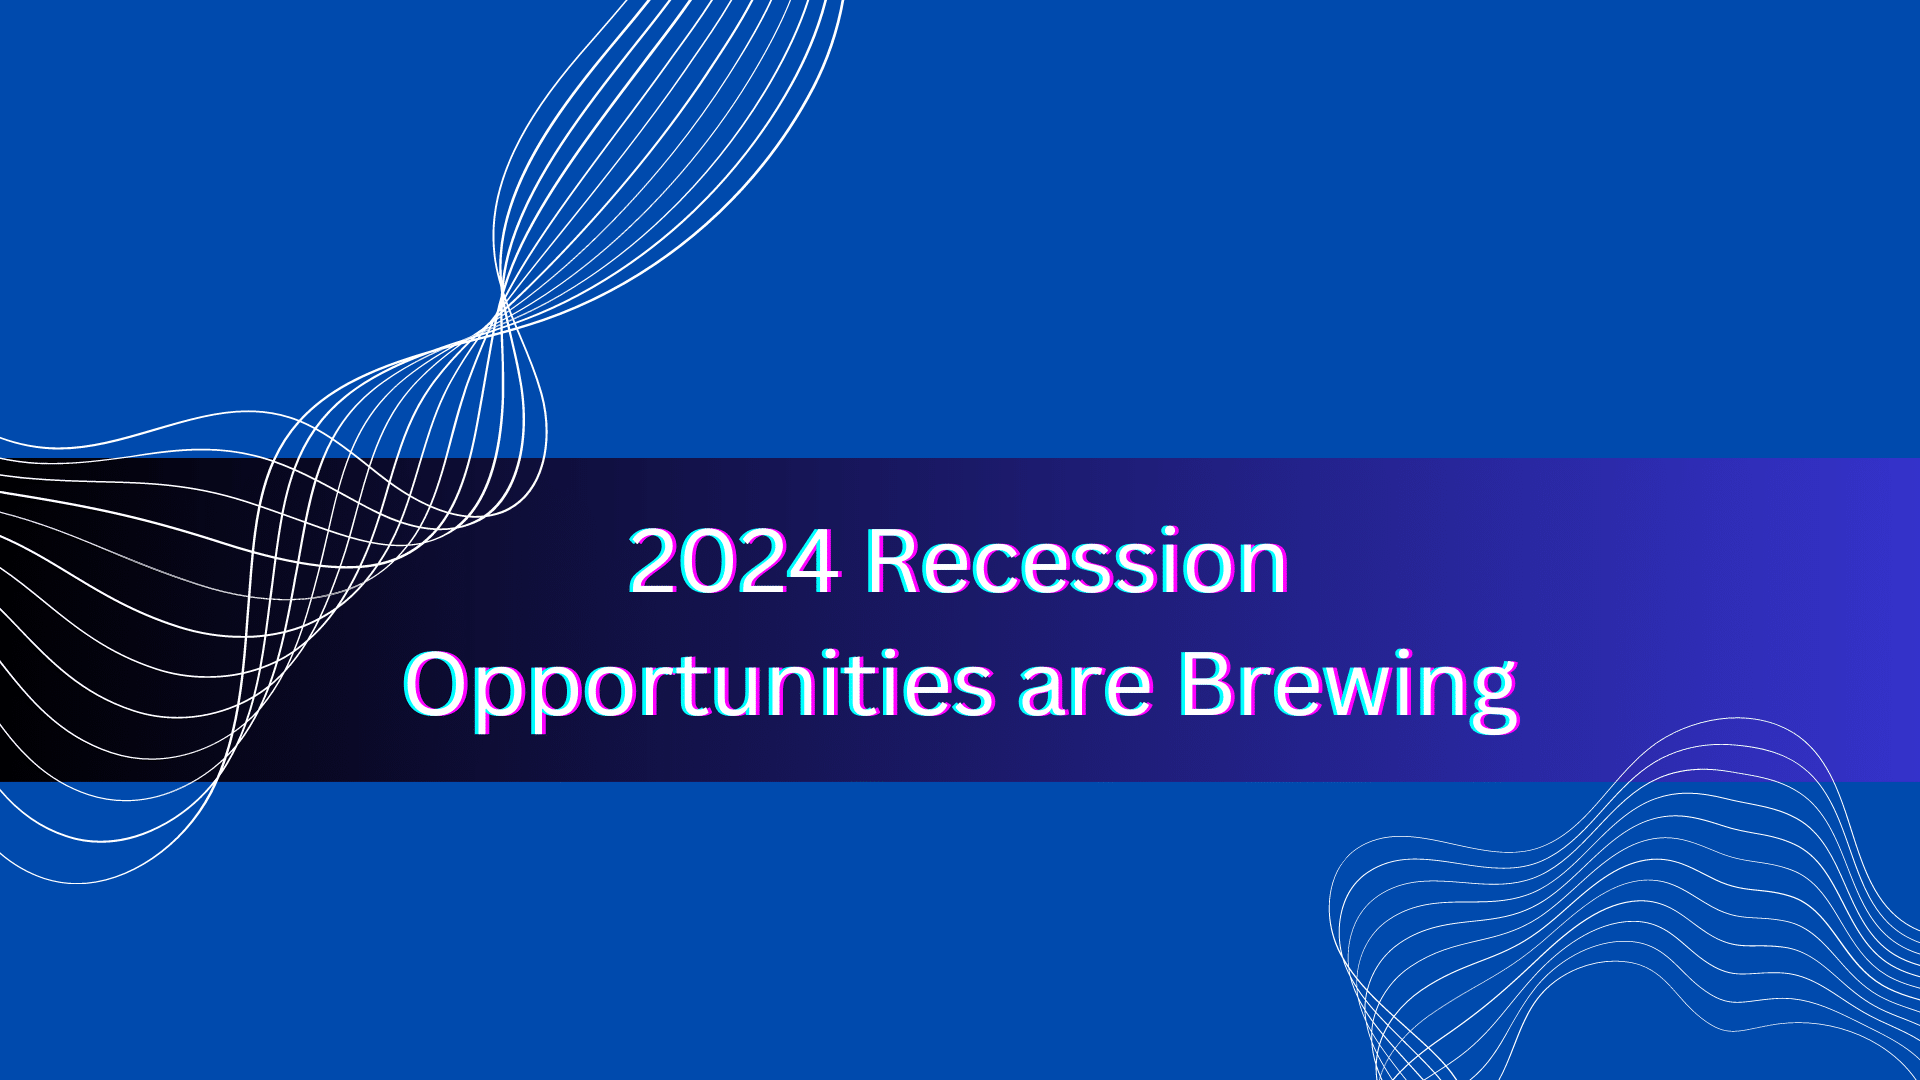 How to get rich in the 2024 recession